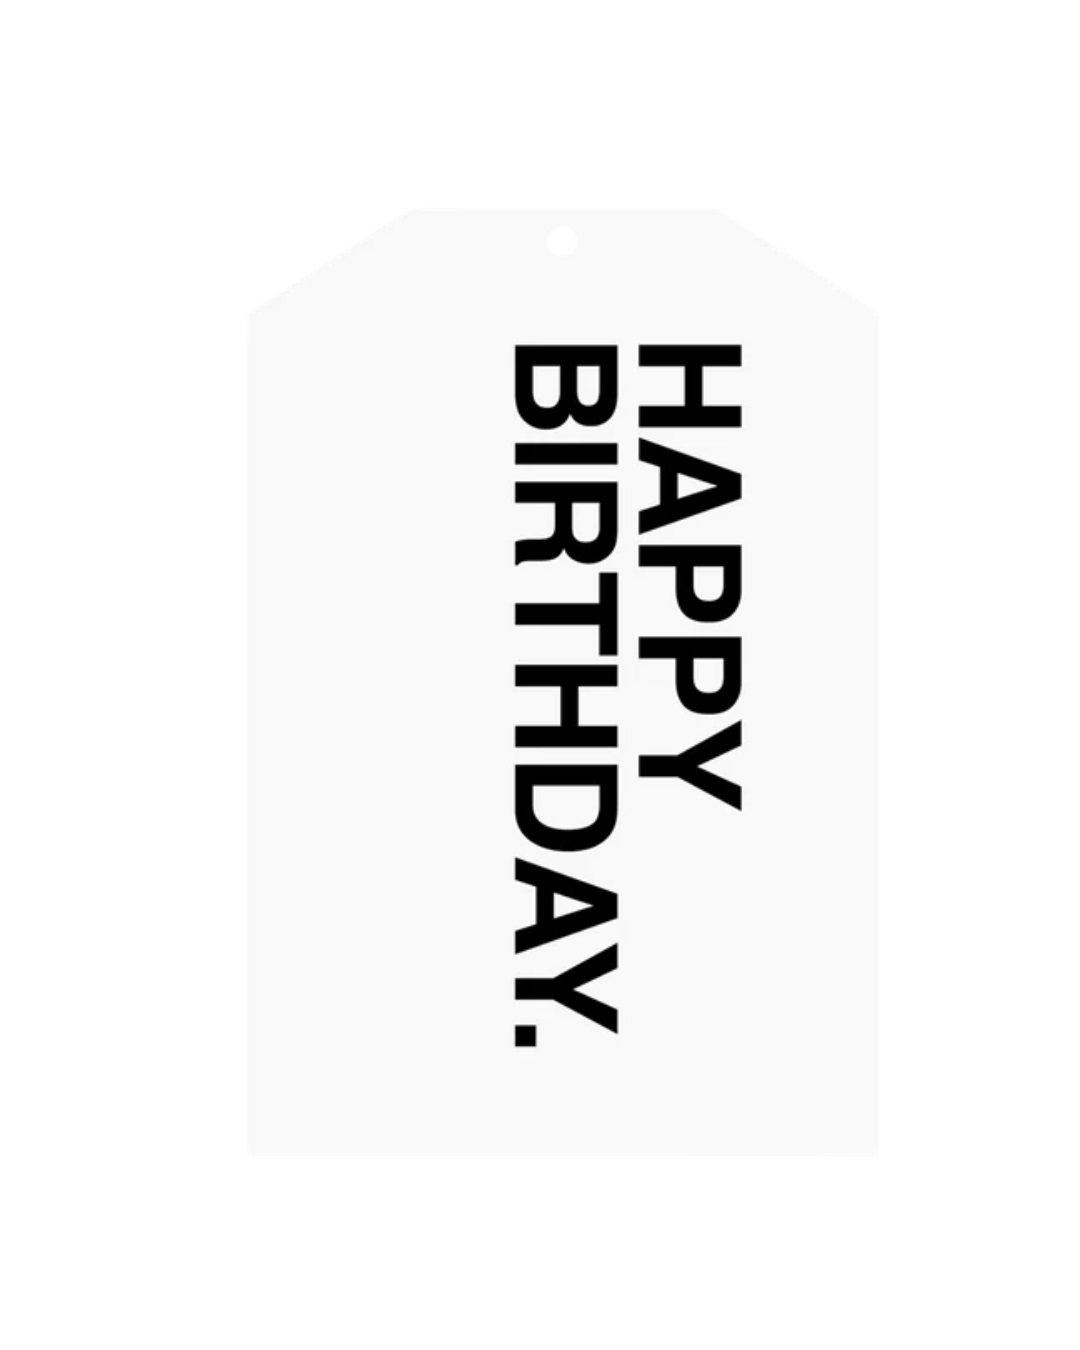 Tag white with Happy birthday black text